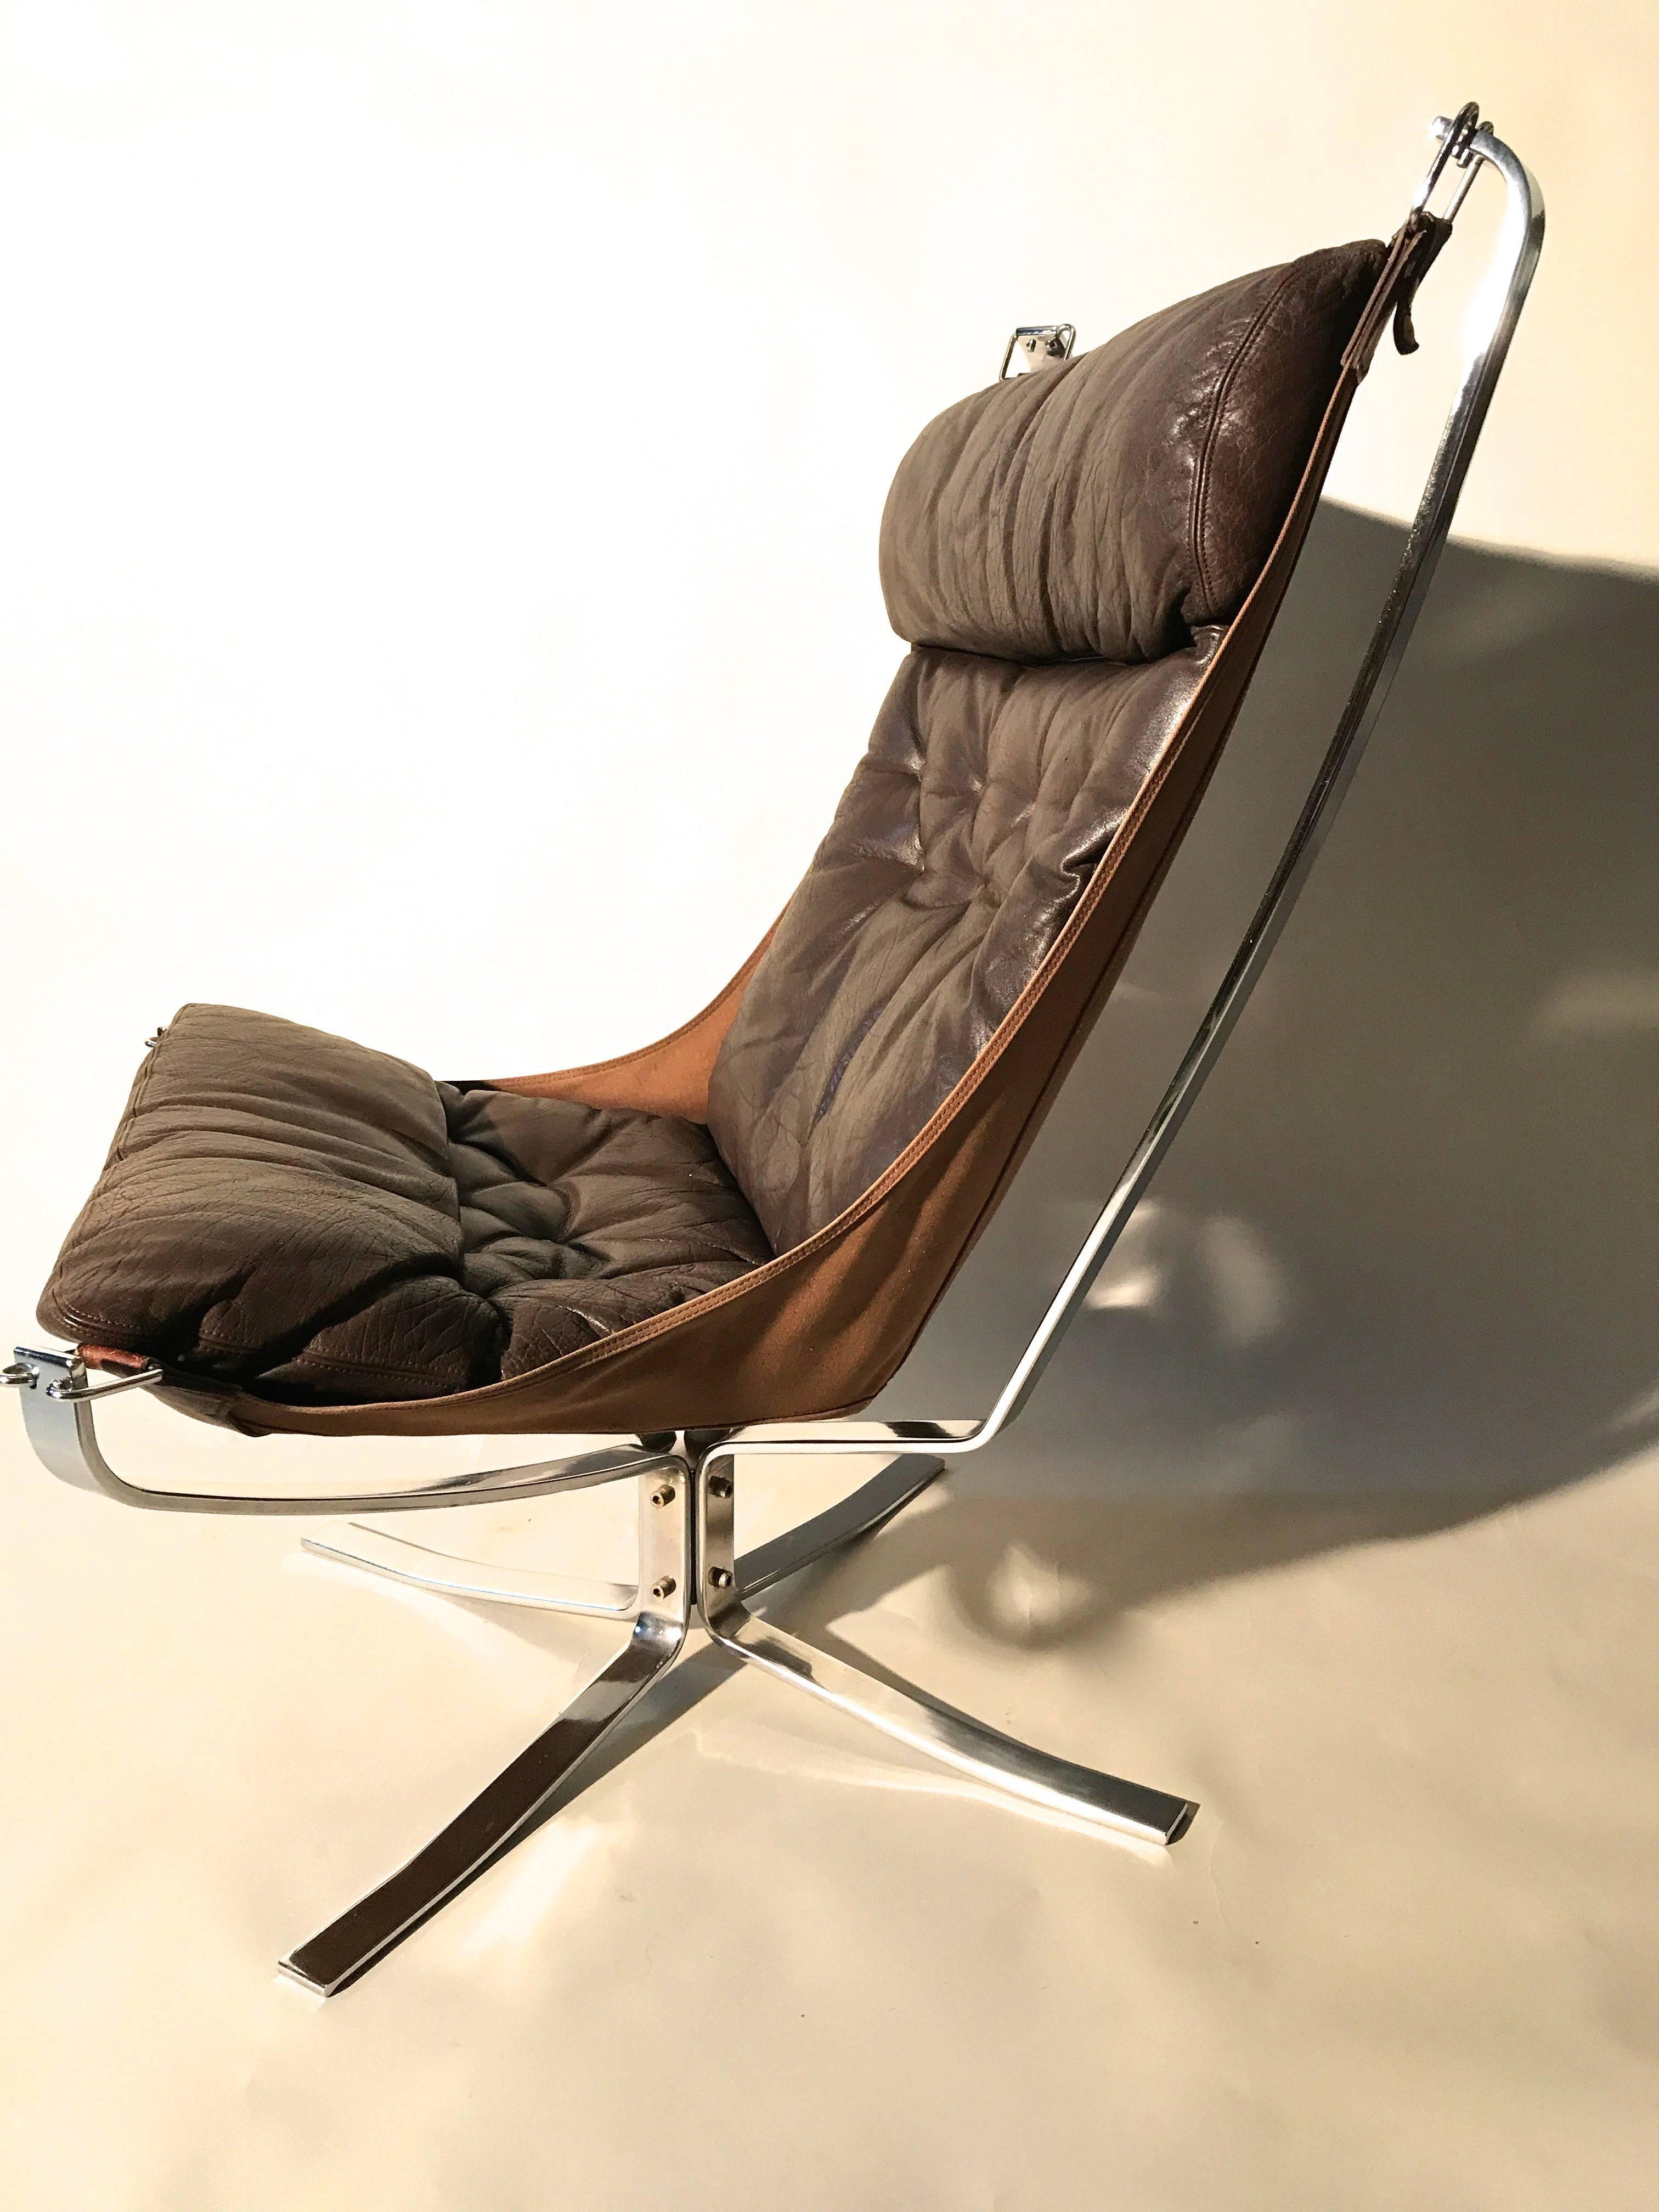 Rare chromed steel and chocolate leather high back falcon chair. The Chrome leather and canvas are all in excellent original condition.
The high back gives an added level of comfort.
   